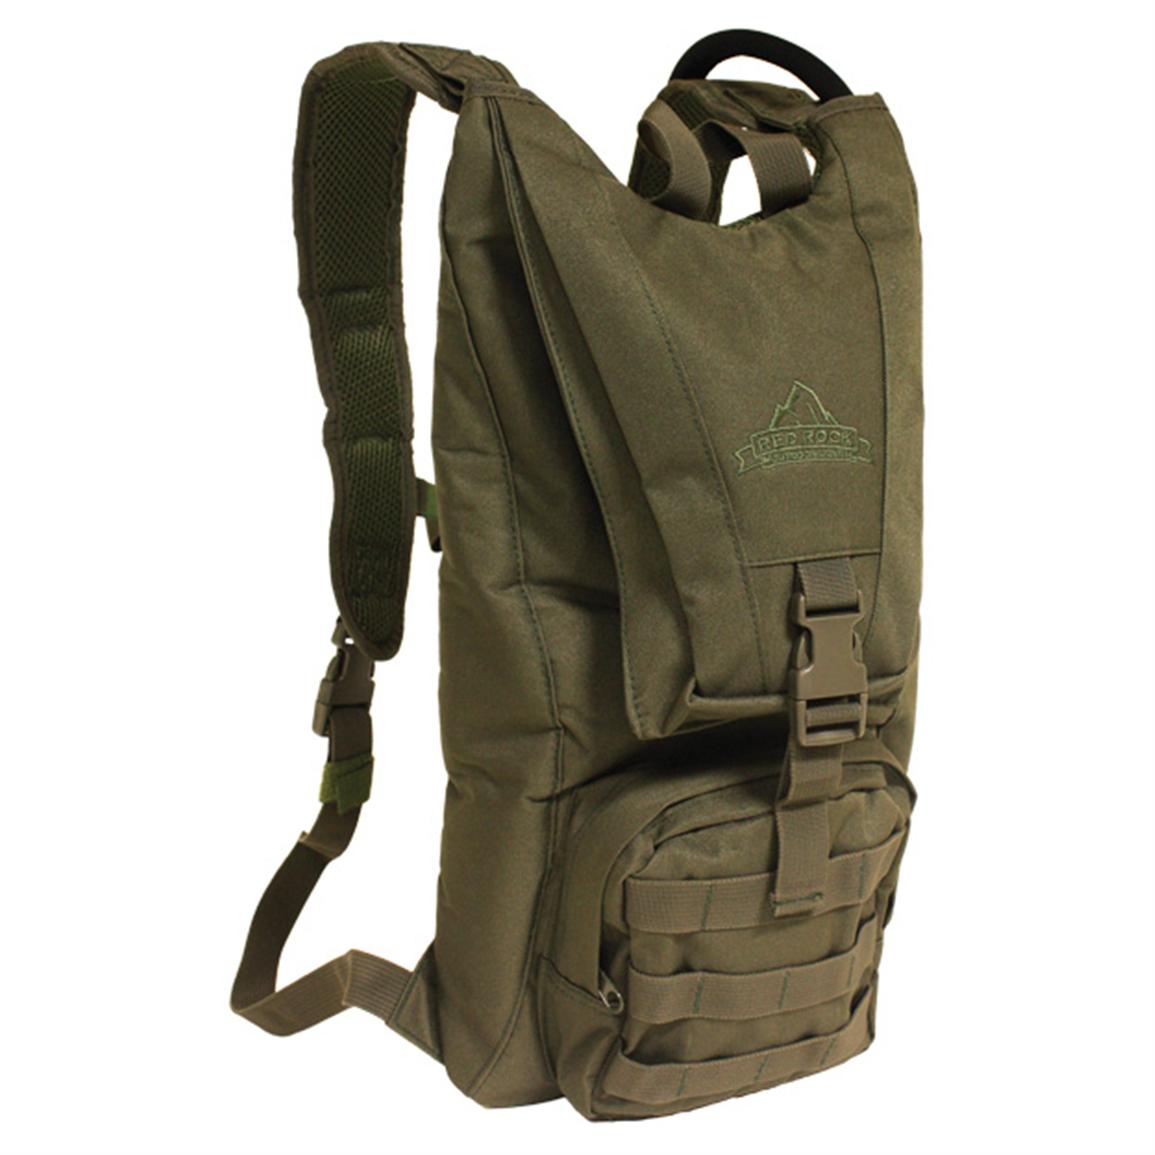 Red Rock Outdoor Gear Piranha Hydration Pack, Olive Drab